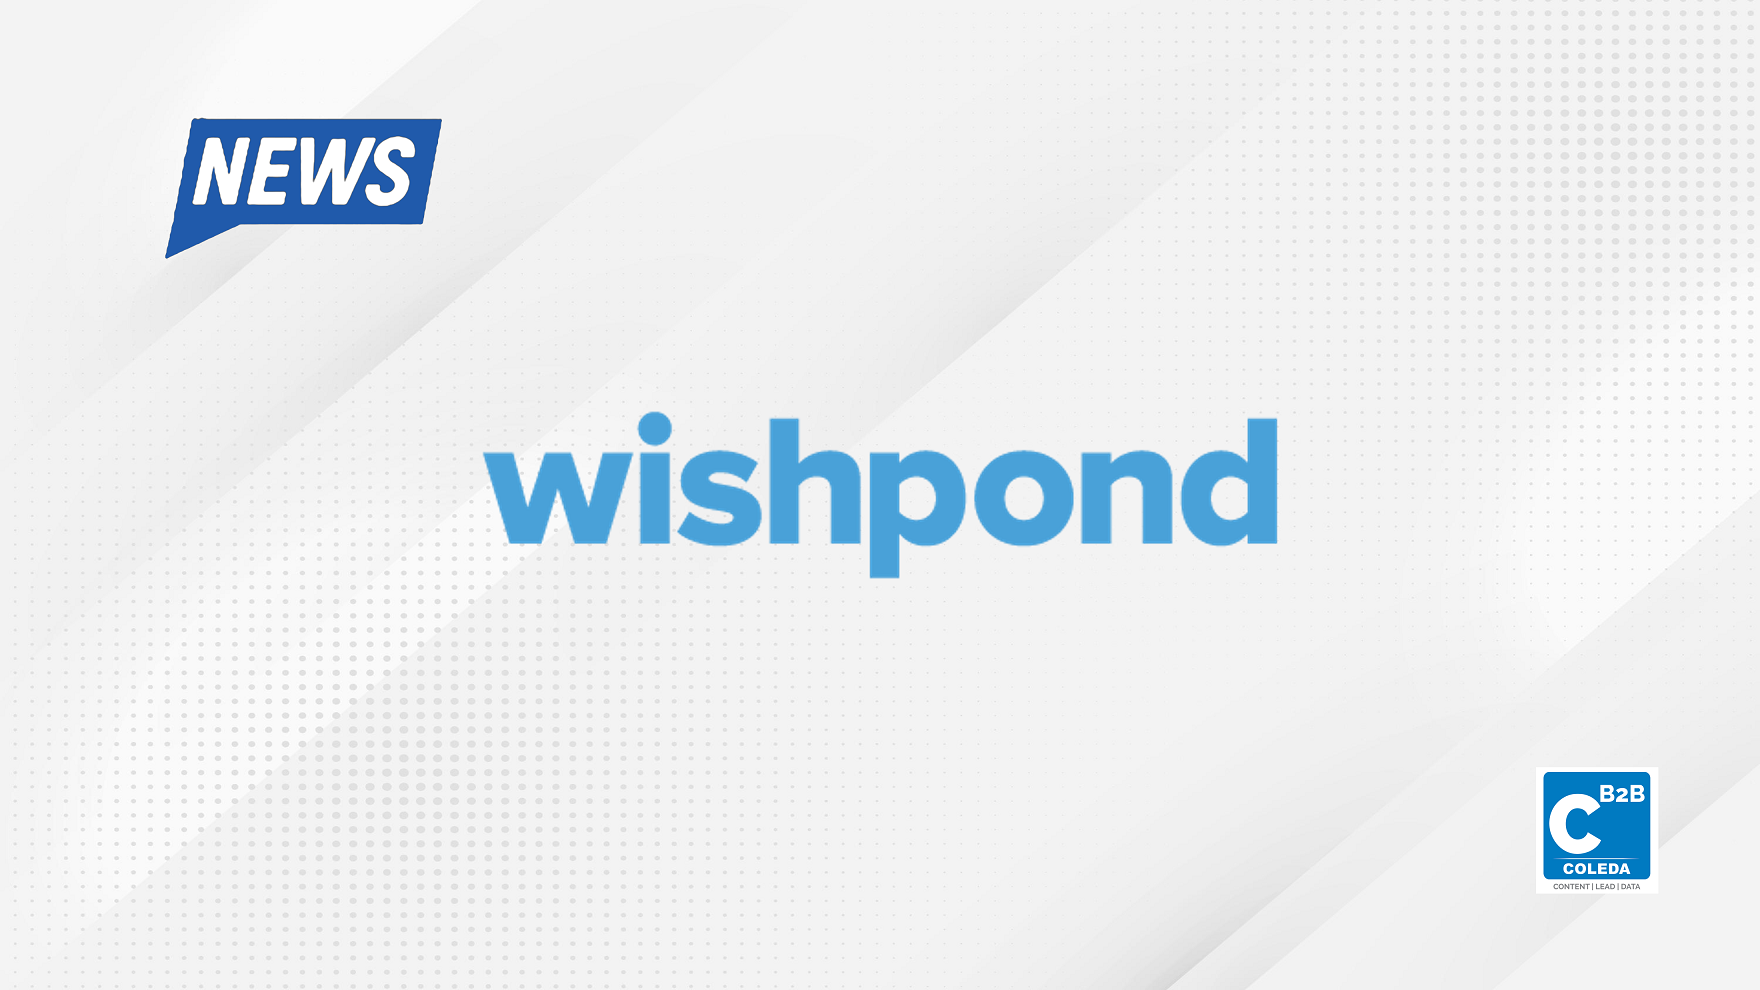 Wishpond Technologies Ltd. launches its new website builder